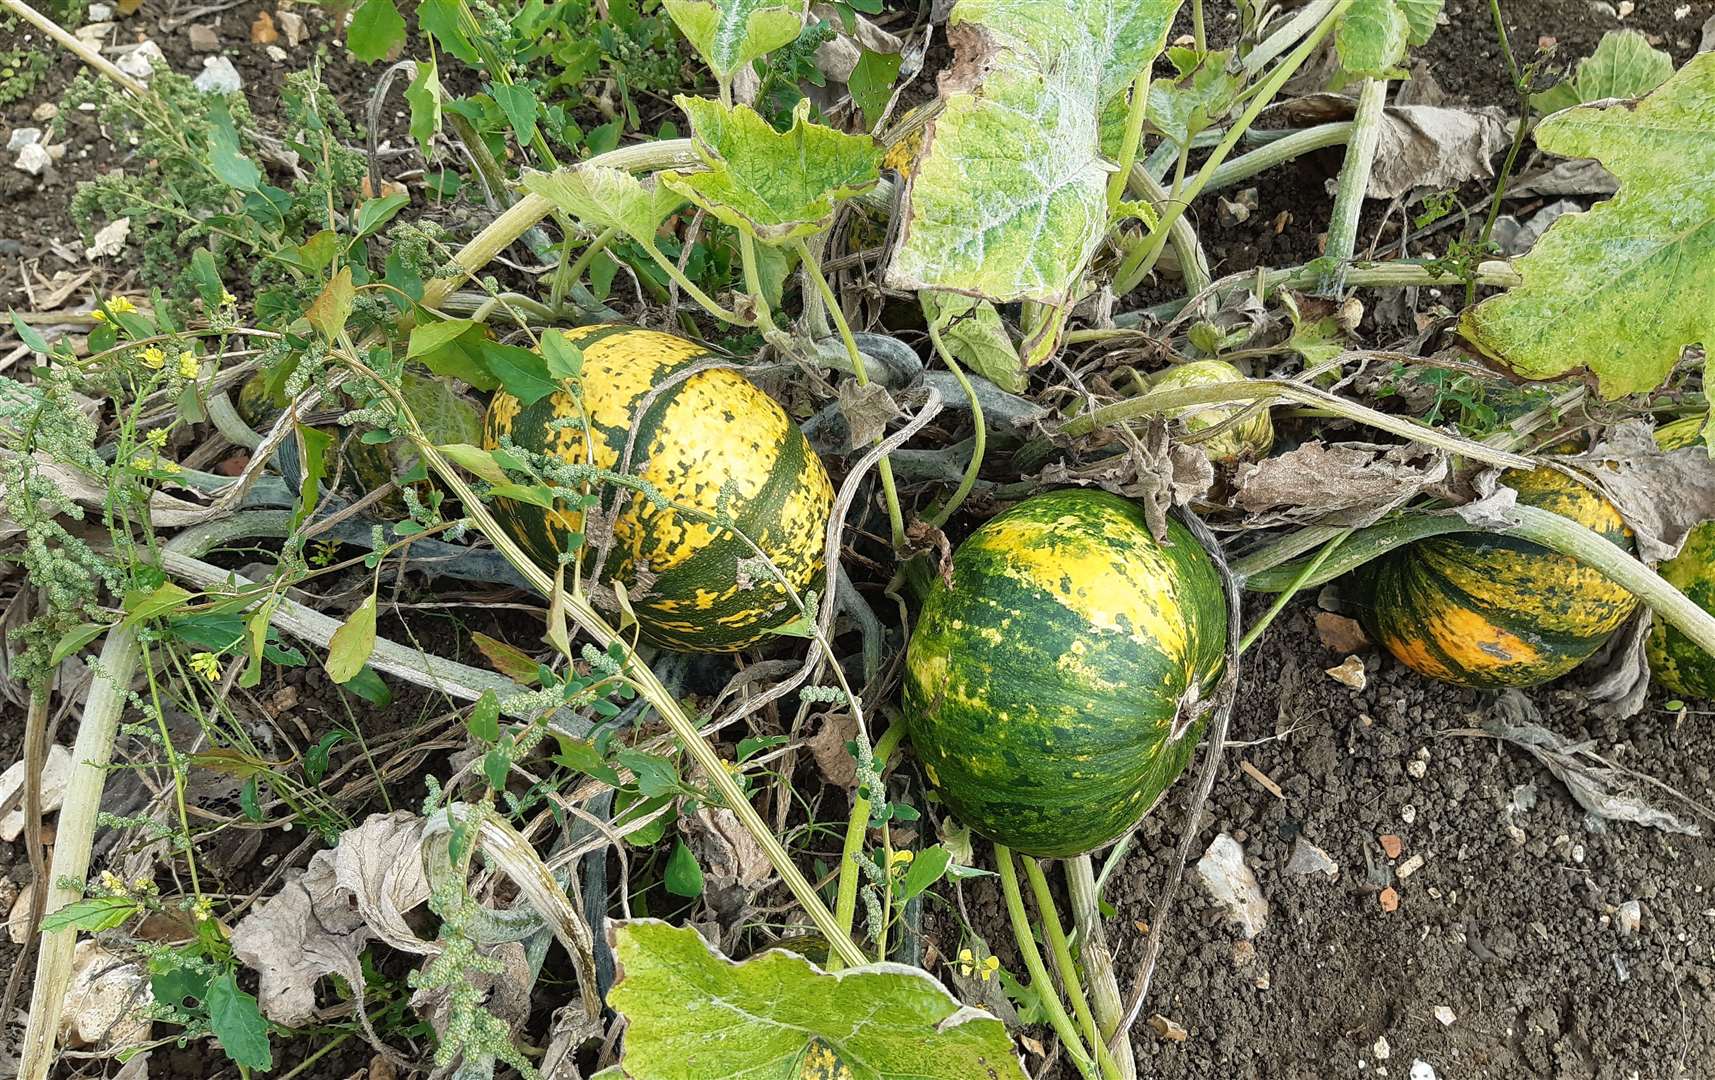 Some of the weird and wacky pumpkins available to pick